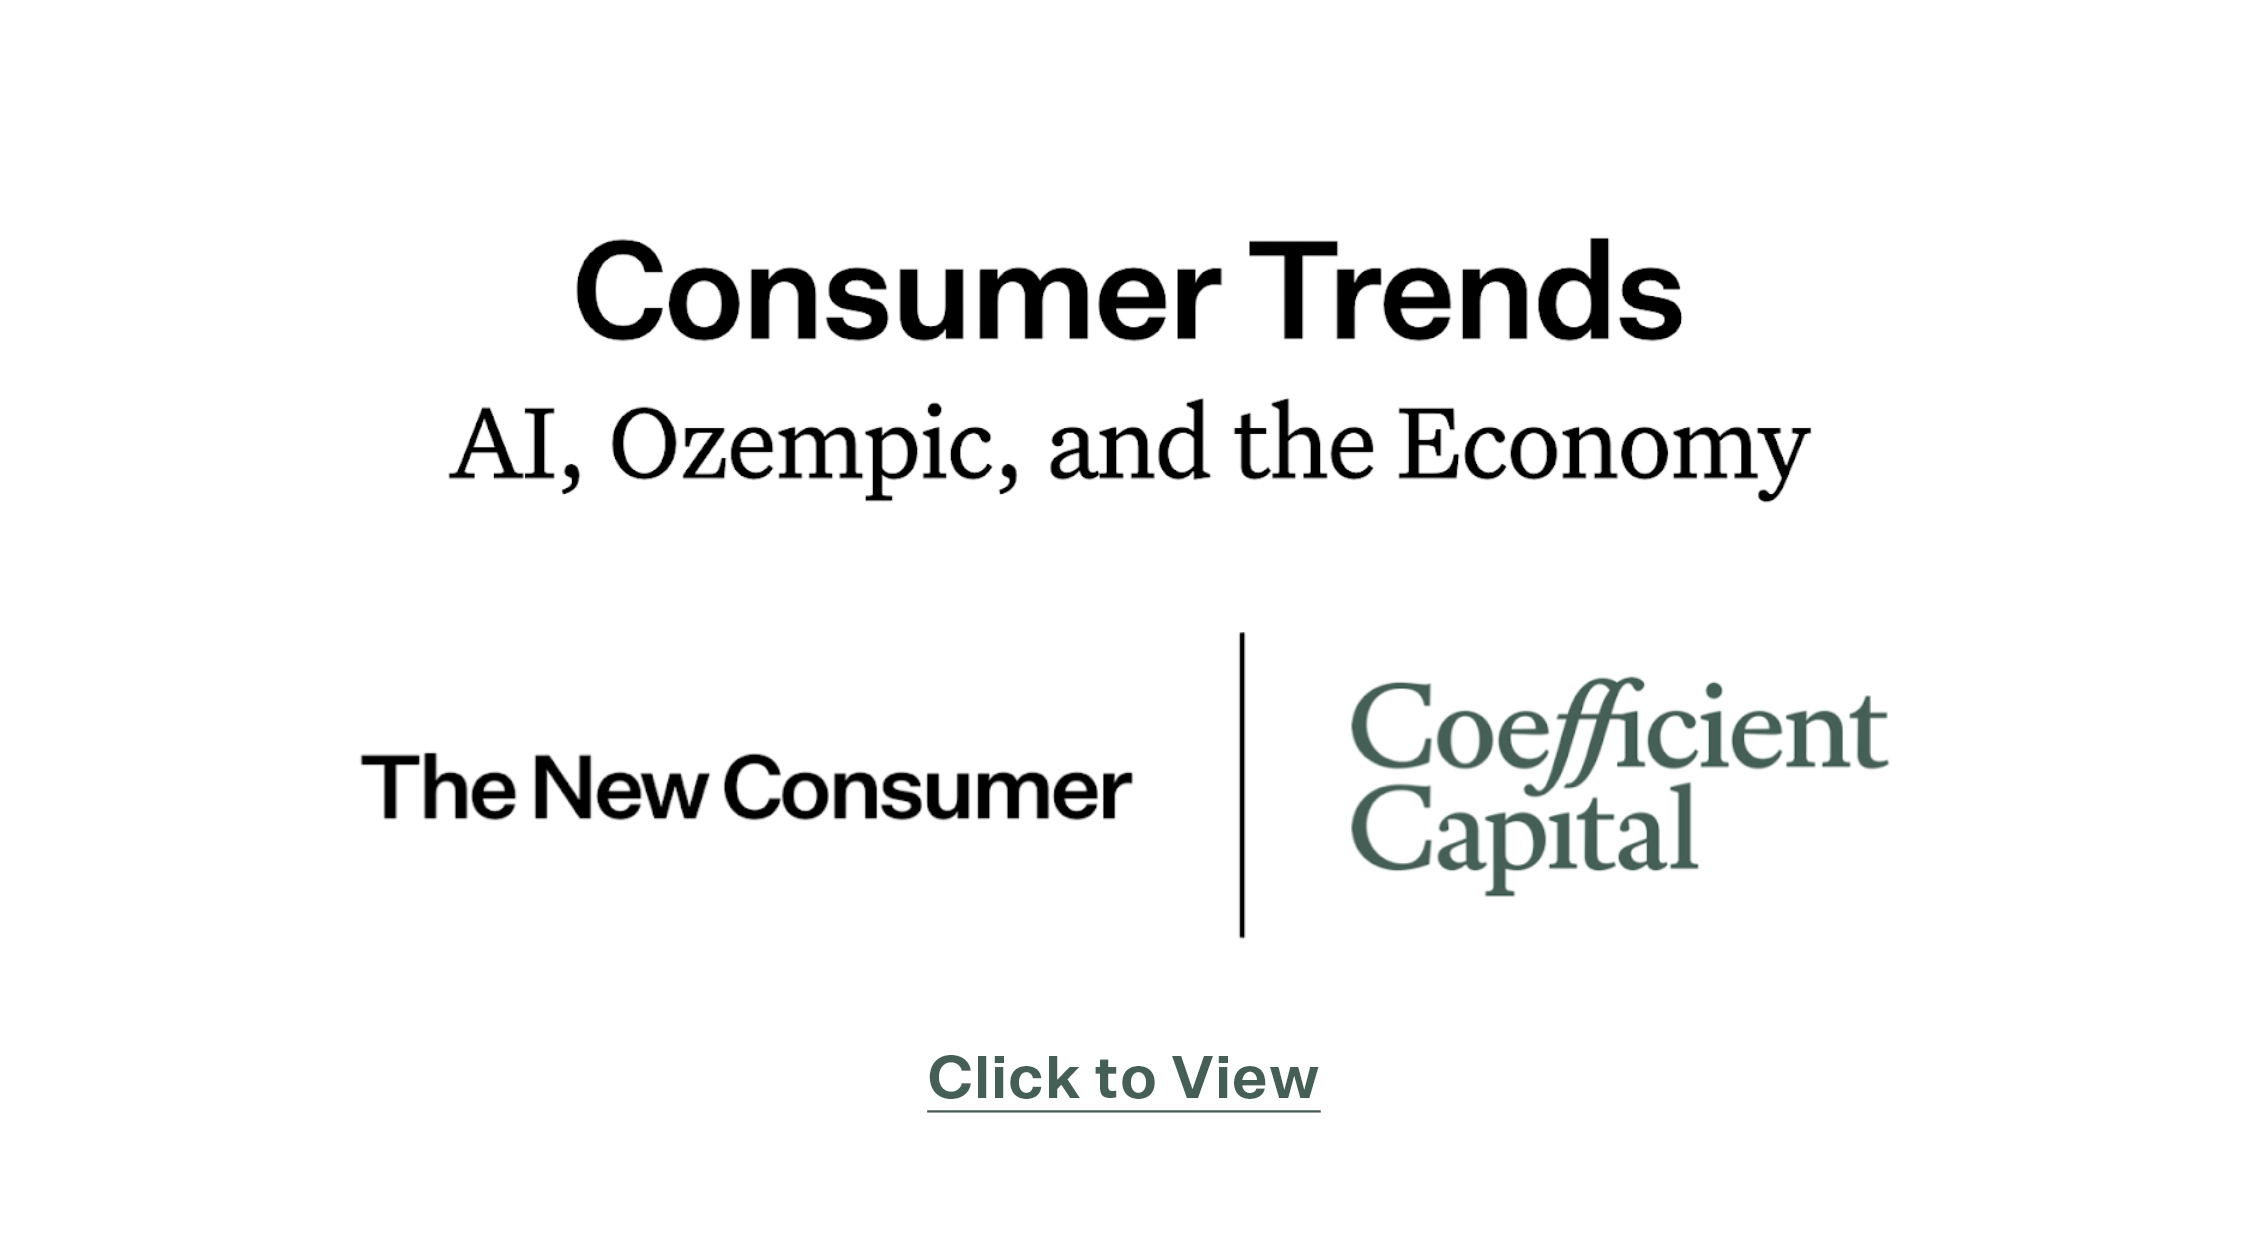 Consumer Trends AI, Ozempic, and the Economy